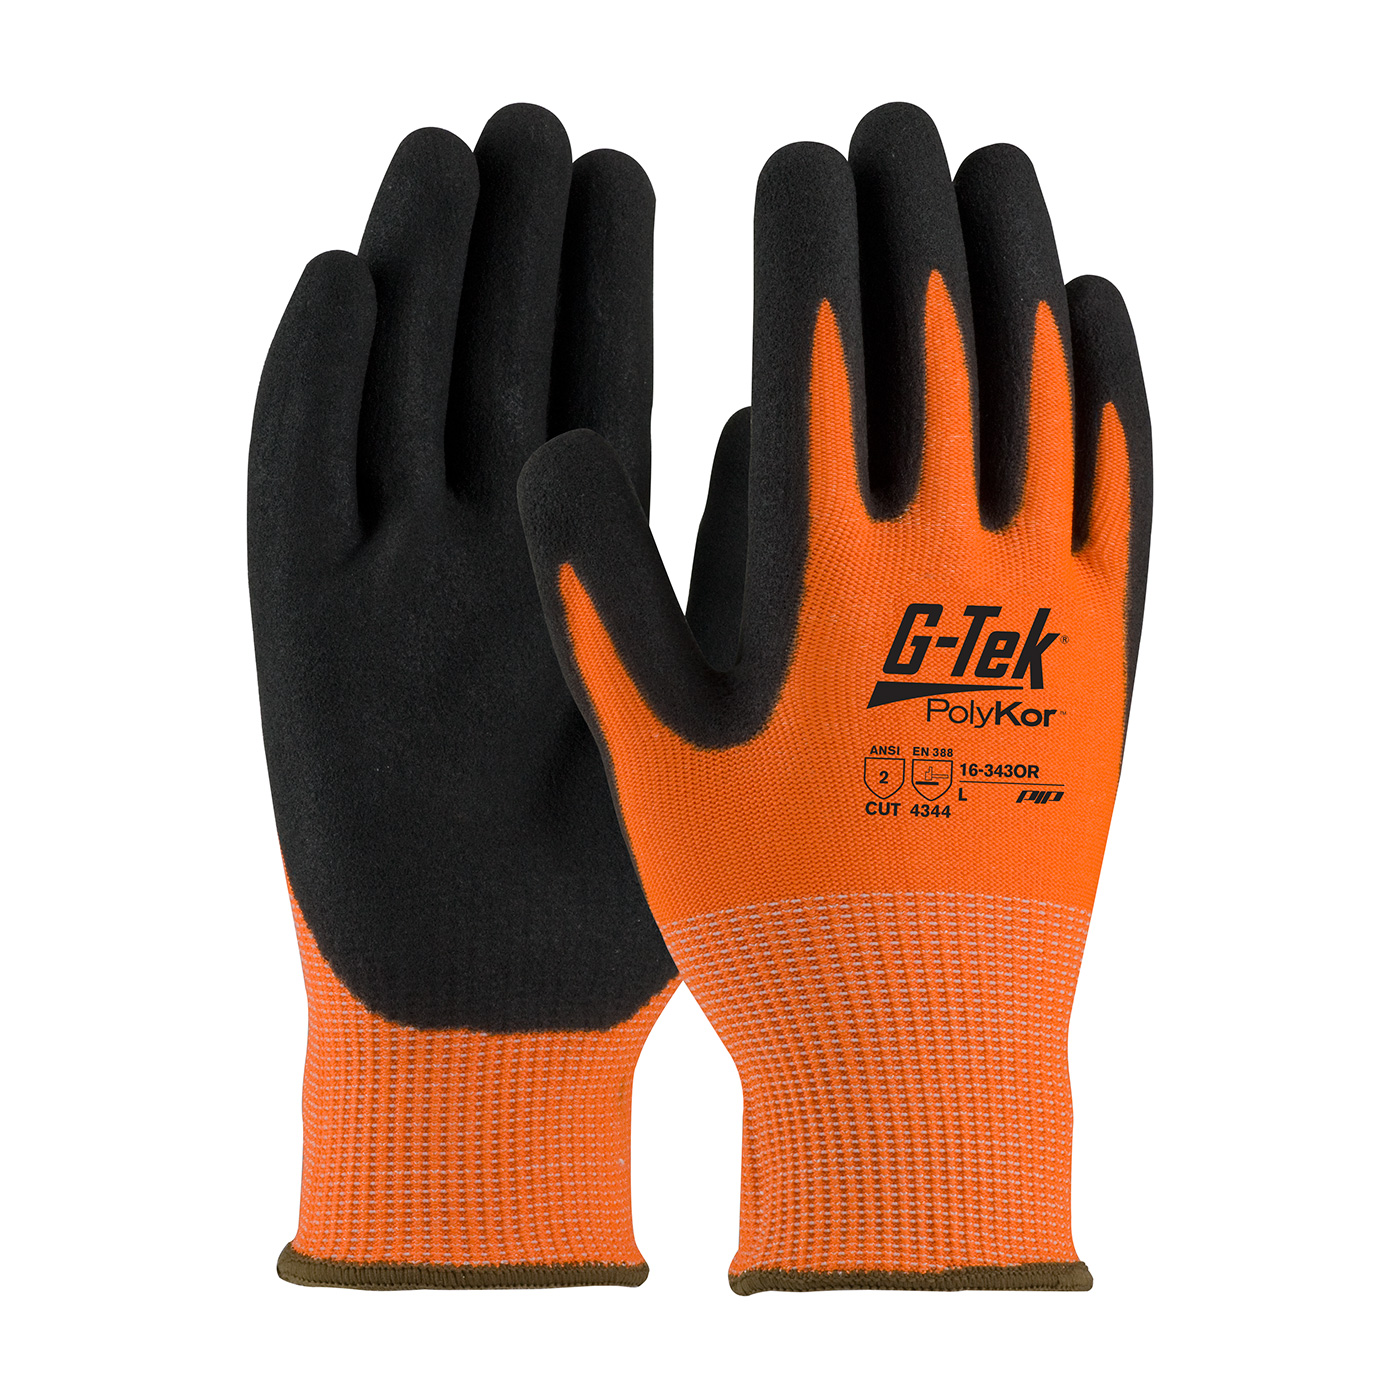 PIP 16-343OR/S G-Tek PolyKor Hi-Vis Seamless Knit PolyKor Blended Glove with Double-Dipped Nitrile Coated MicroSurface Grip on Palm & Fingers - Small PID-16 343OR S